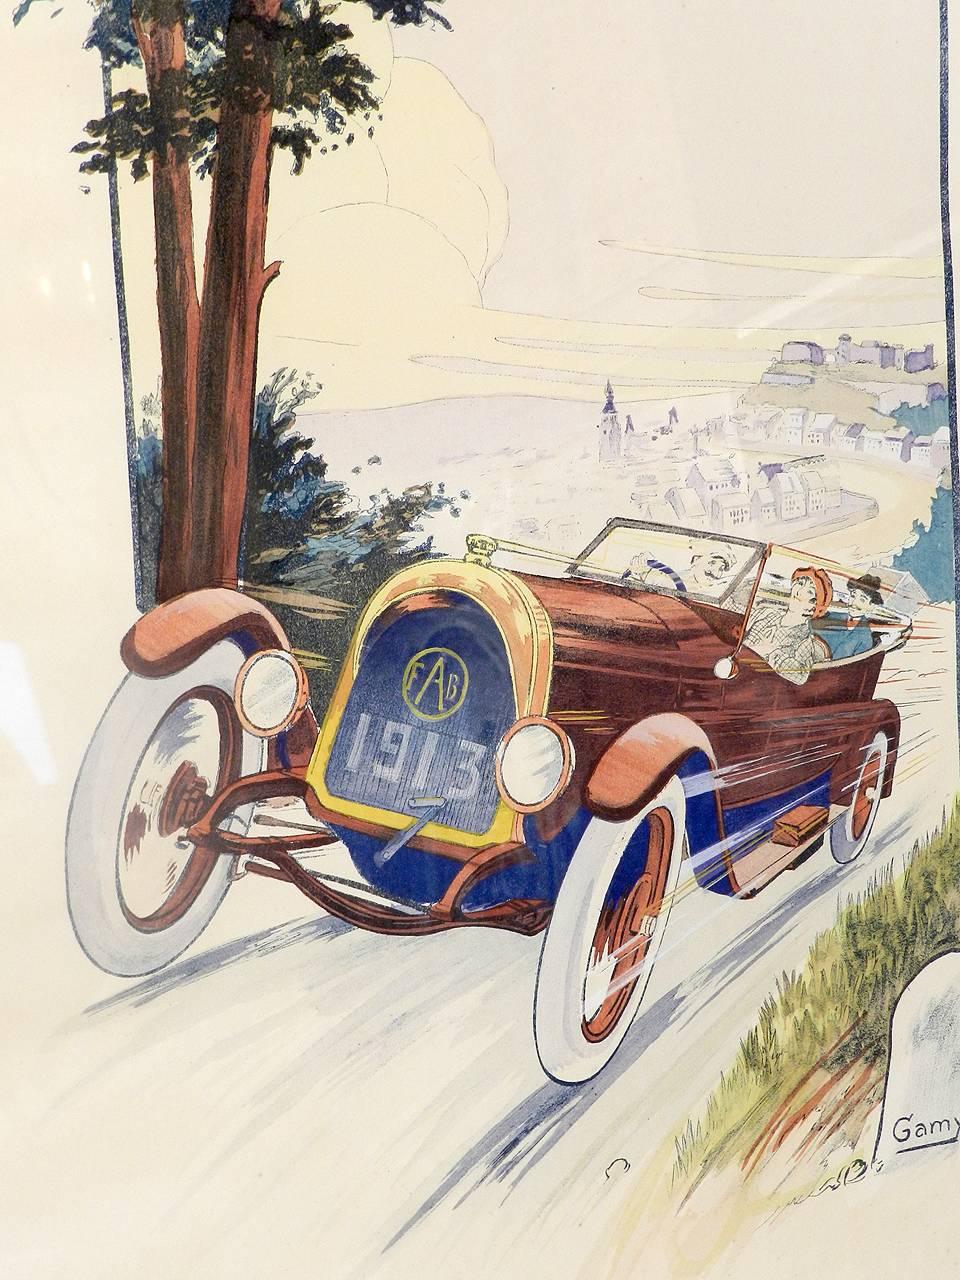 A hand-colored 1913 lithograph by French artist Gamy. Titled: Fabrique Automobile Belge Bruxelles.

Ernest Montaut (1879-1909), a French artist, was celebrated as an illustrator of early automobile racing, air and water